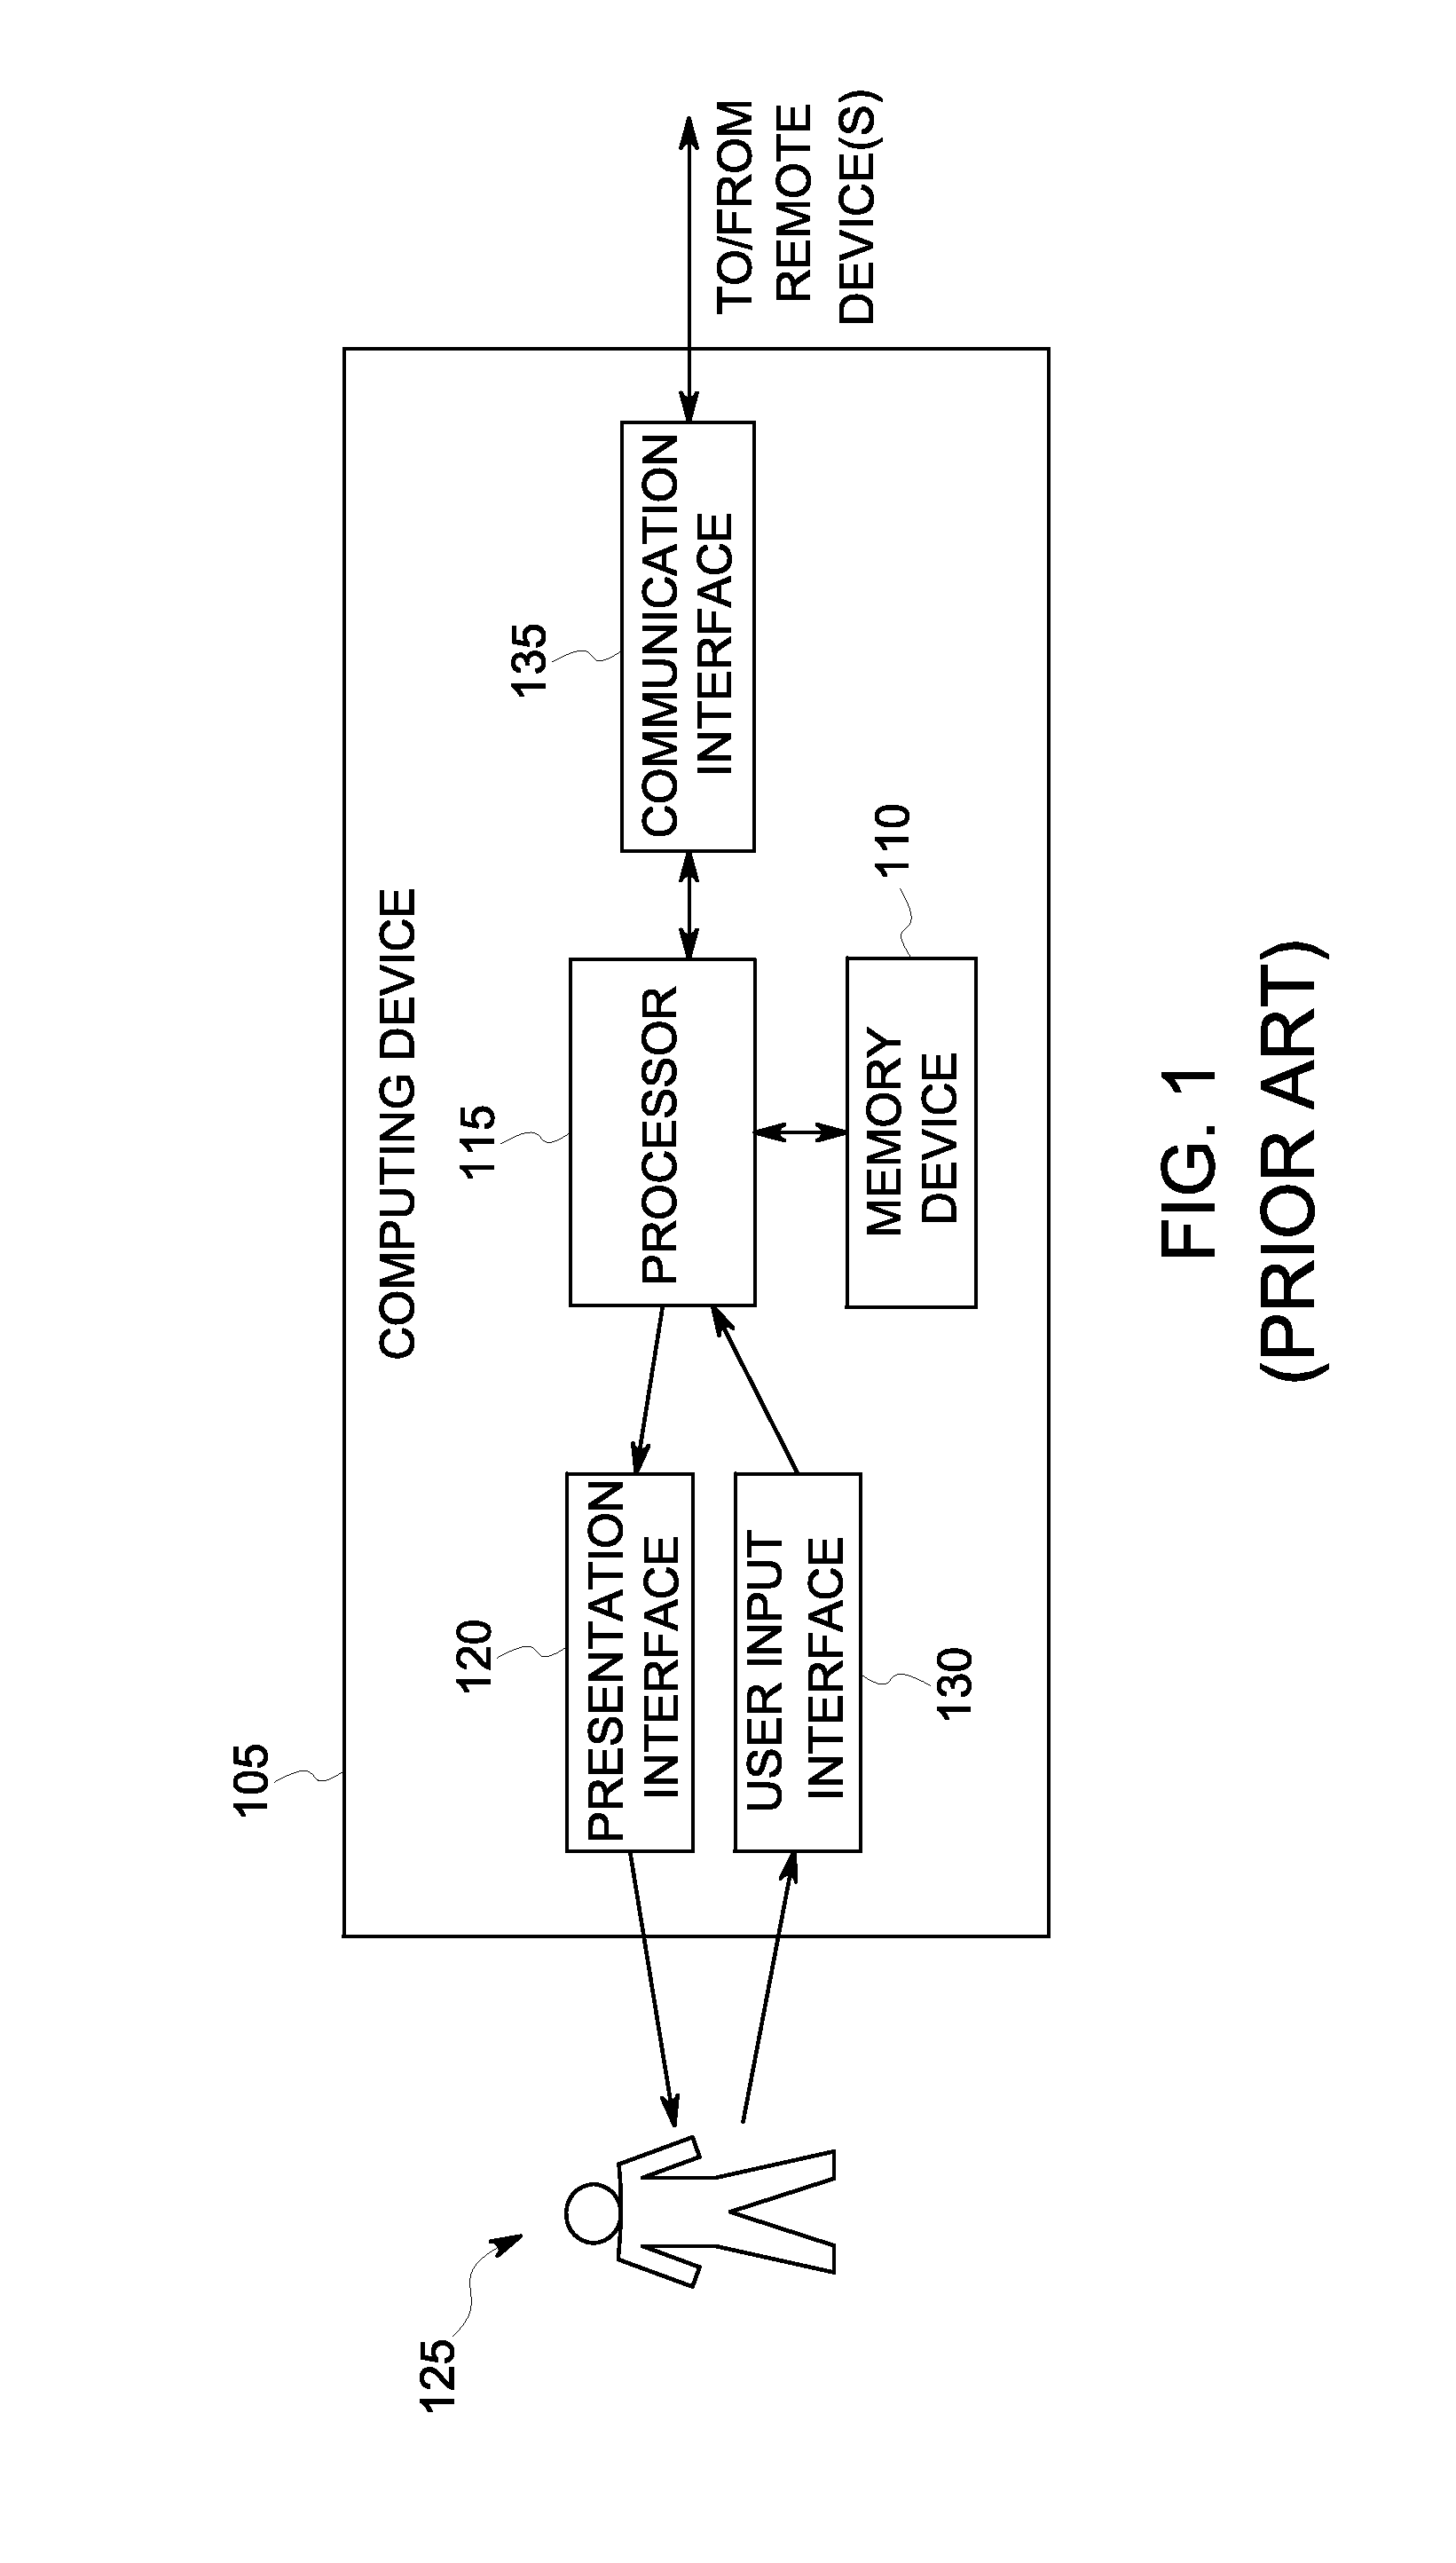 Hybrid high voltage direct current converter systems